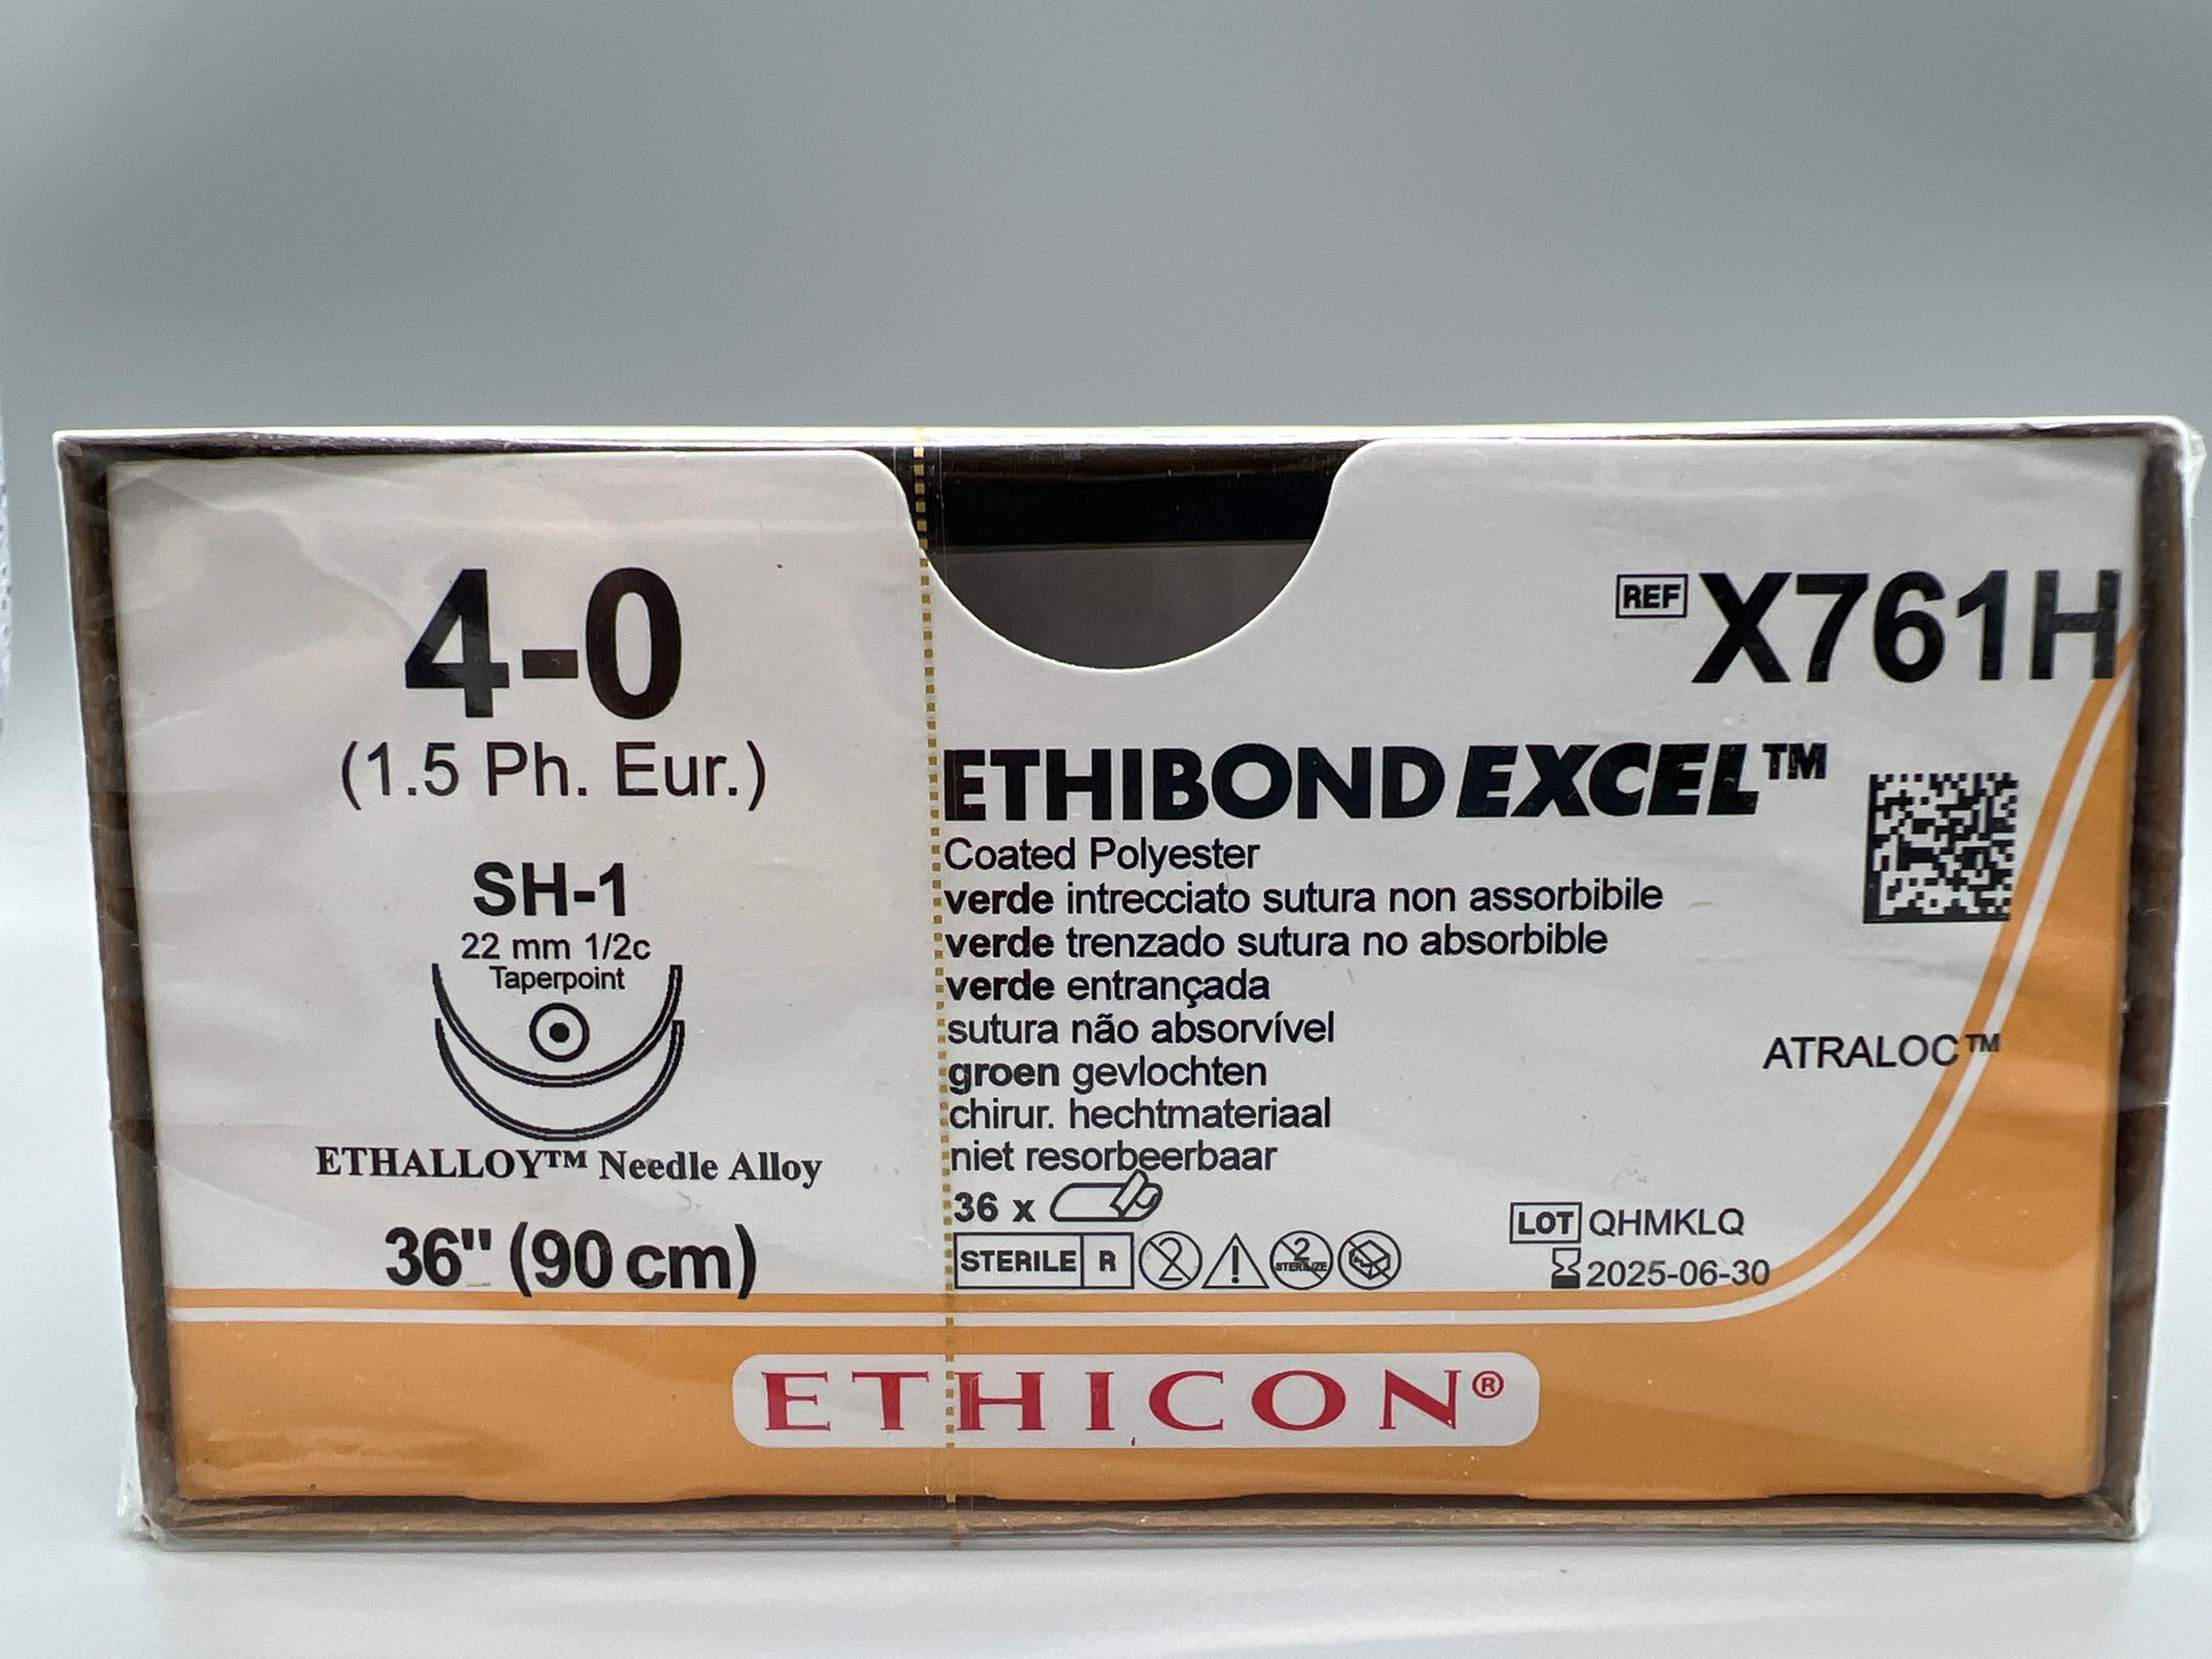 ETHIBOND EXCEL COATED POLYESTER GREEN BRAIDED NON-ABSORBABLE SUTURE SH-1 22MM 1/2C TAPERPOINT ETHALLOY NEEDLE ALLOY